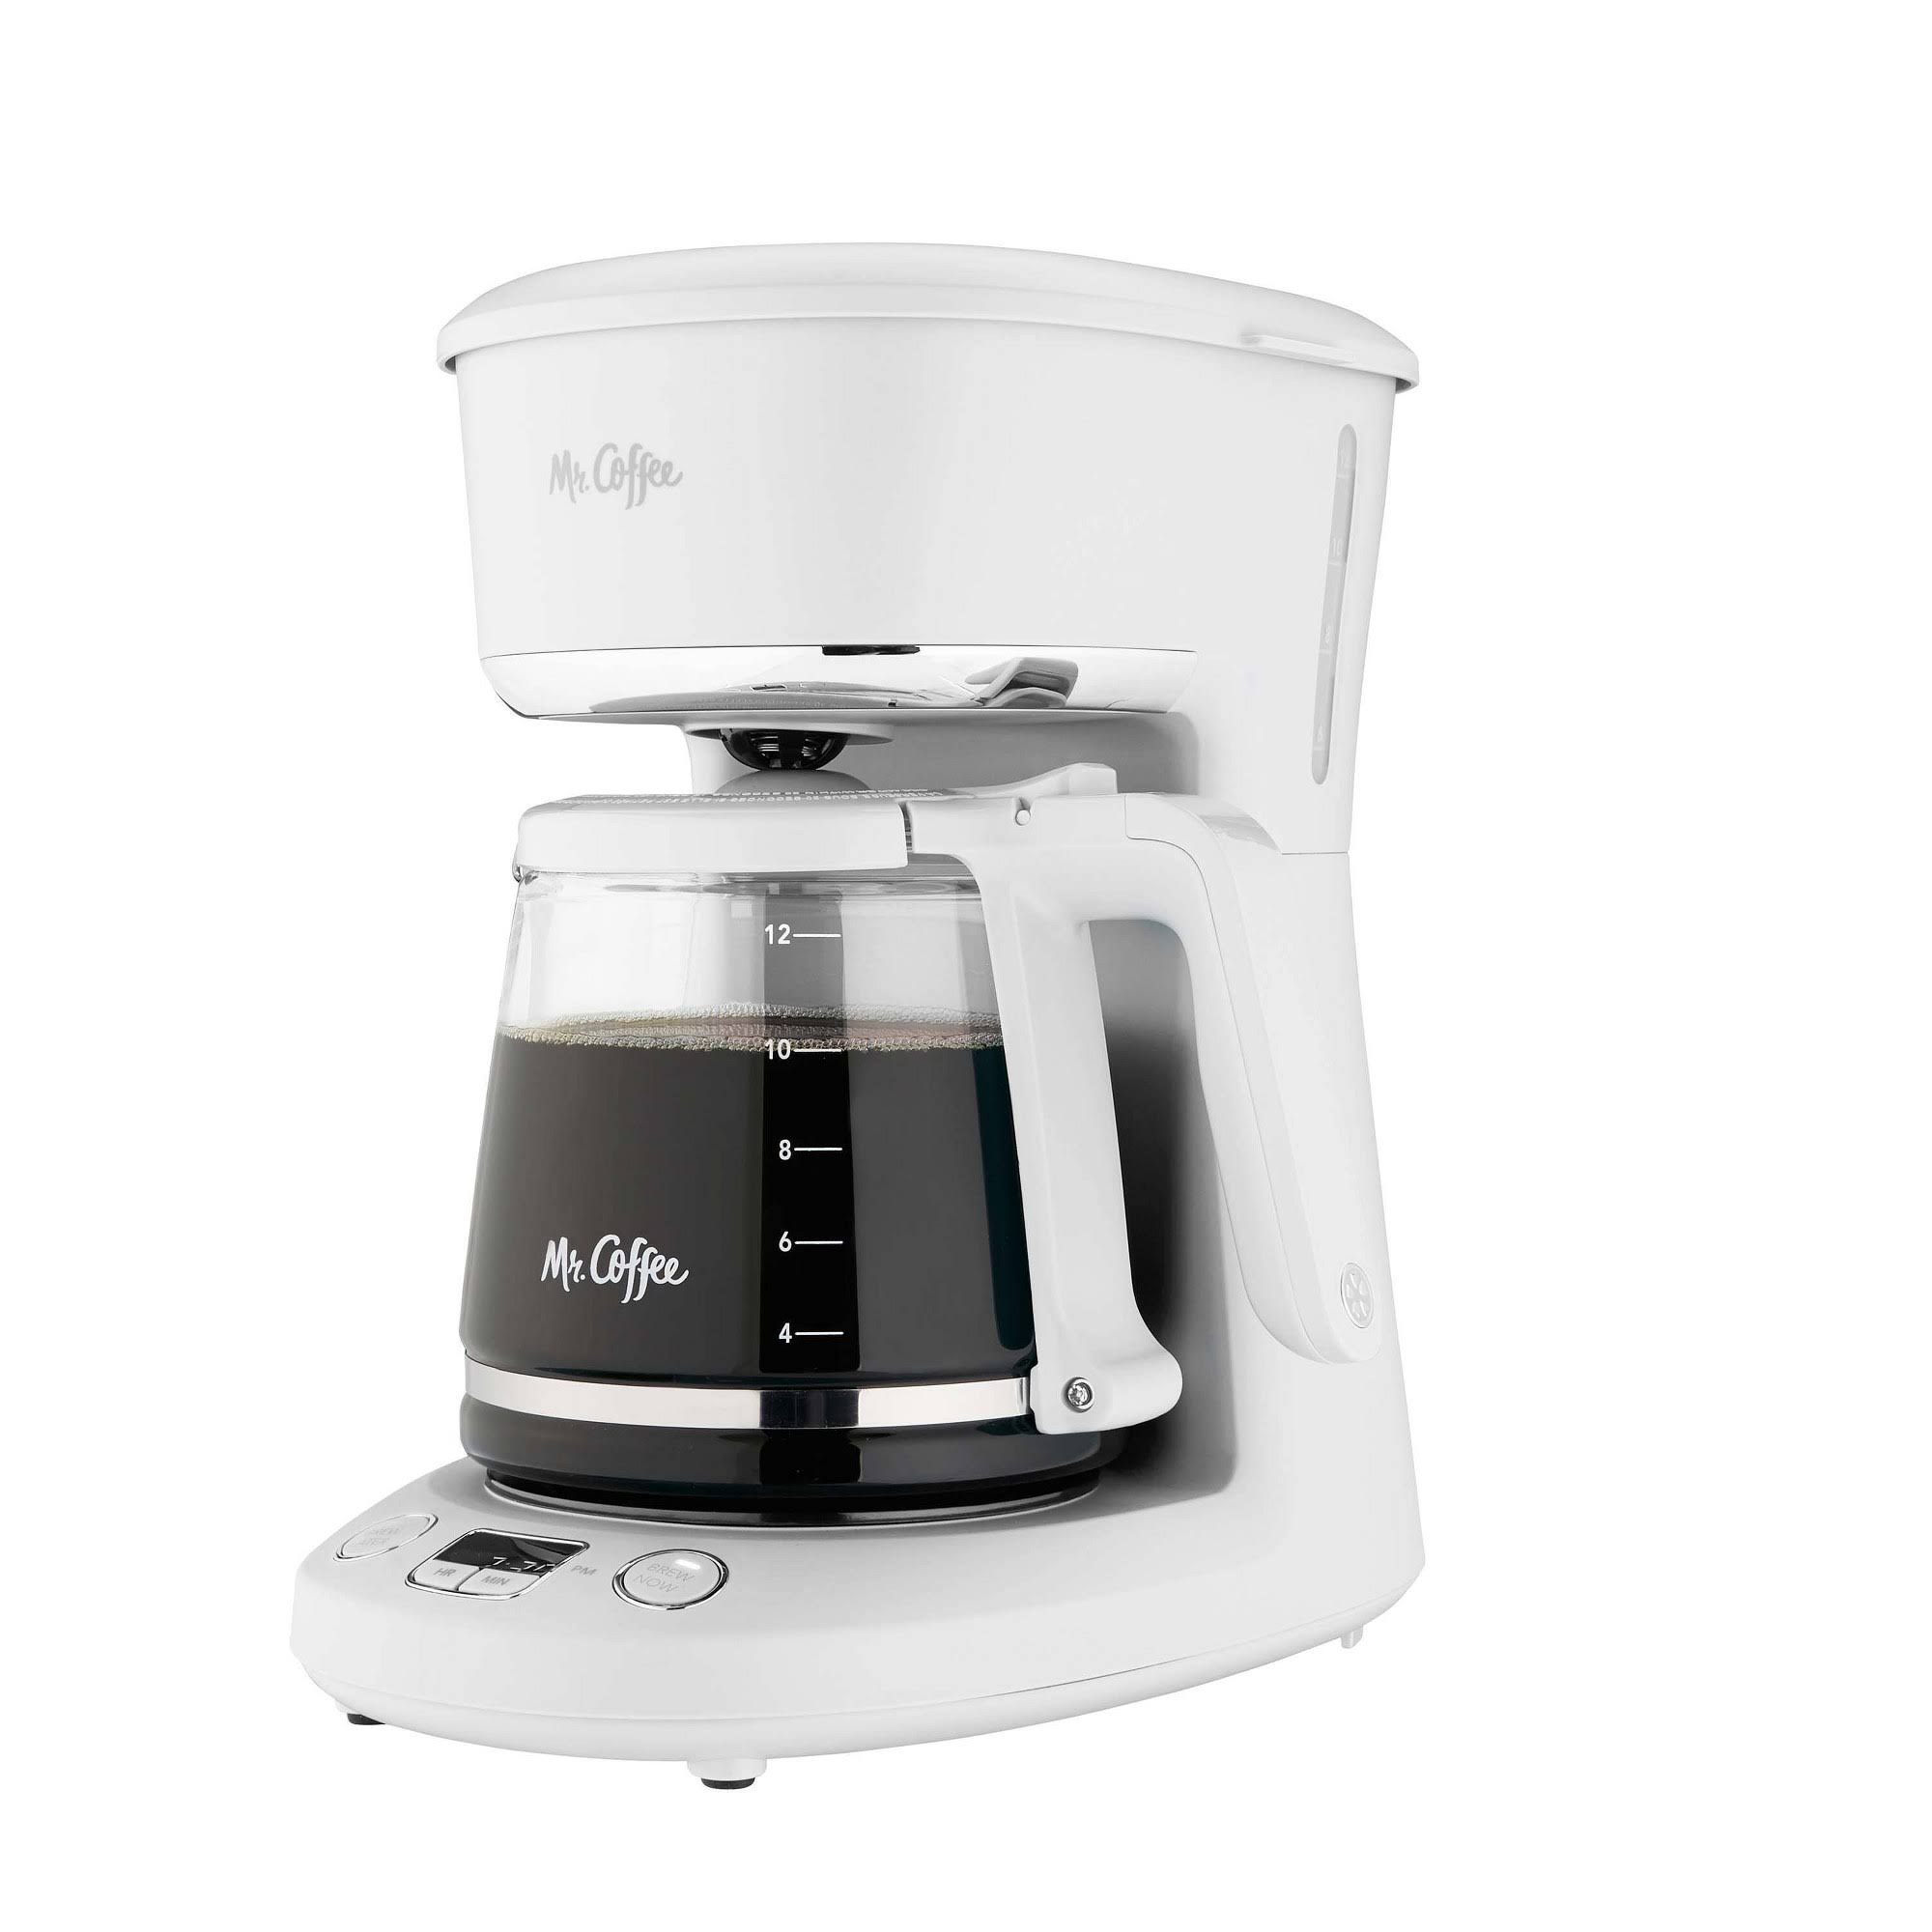 Mr. Coffee 12 Cup White Coffee Maker